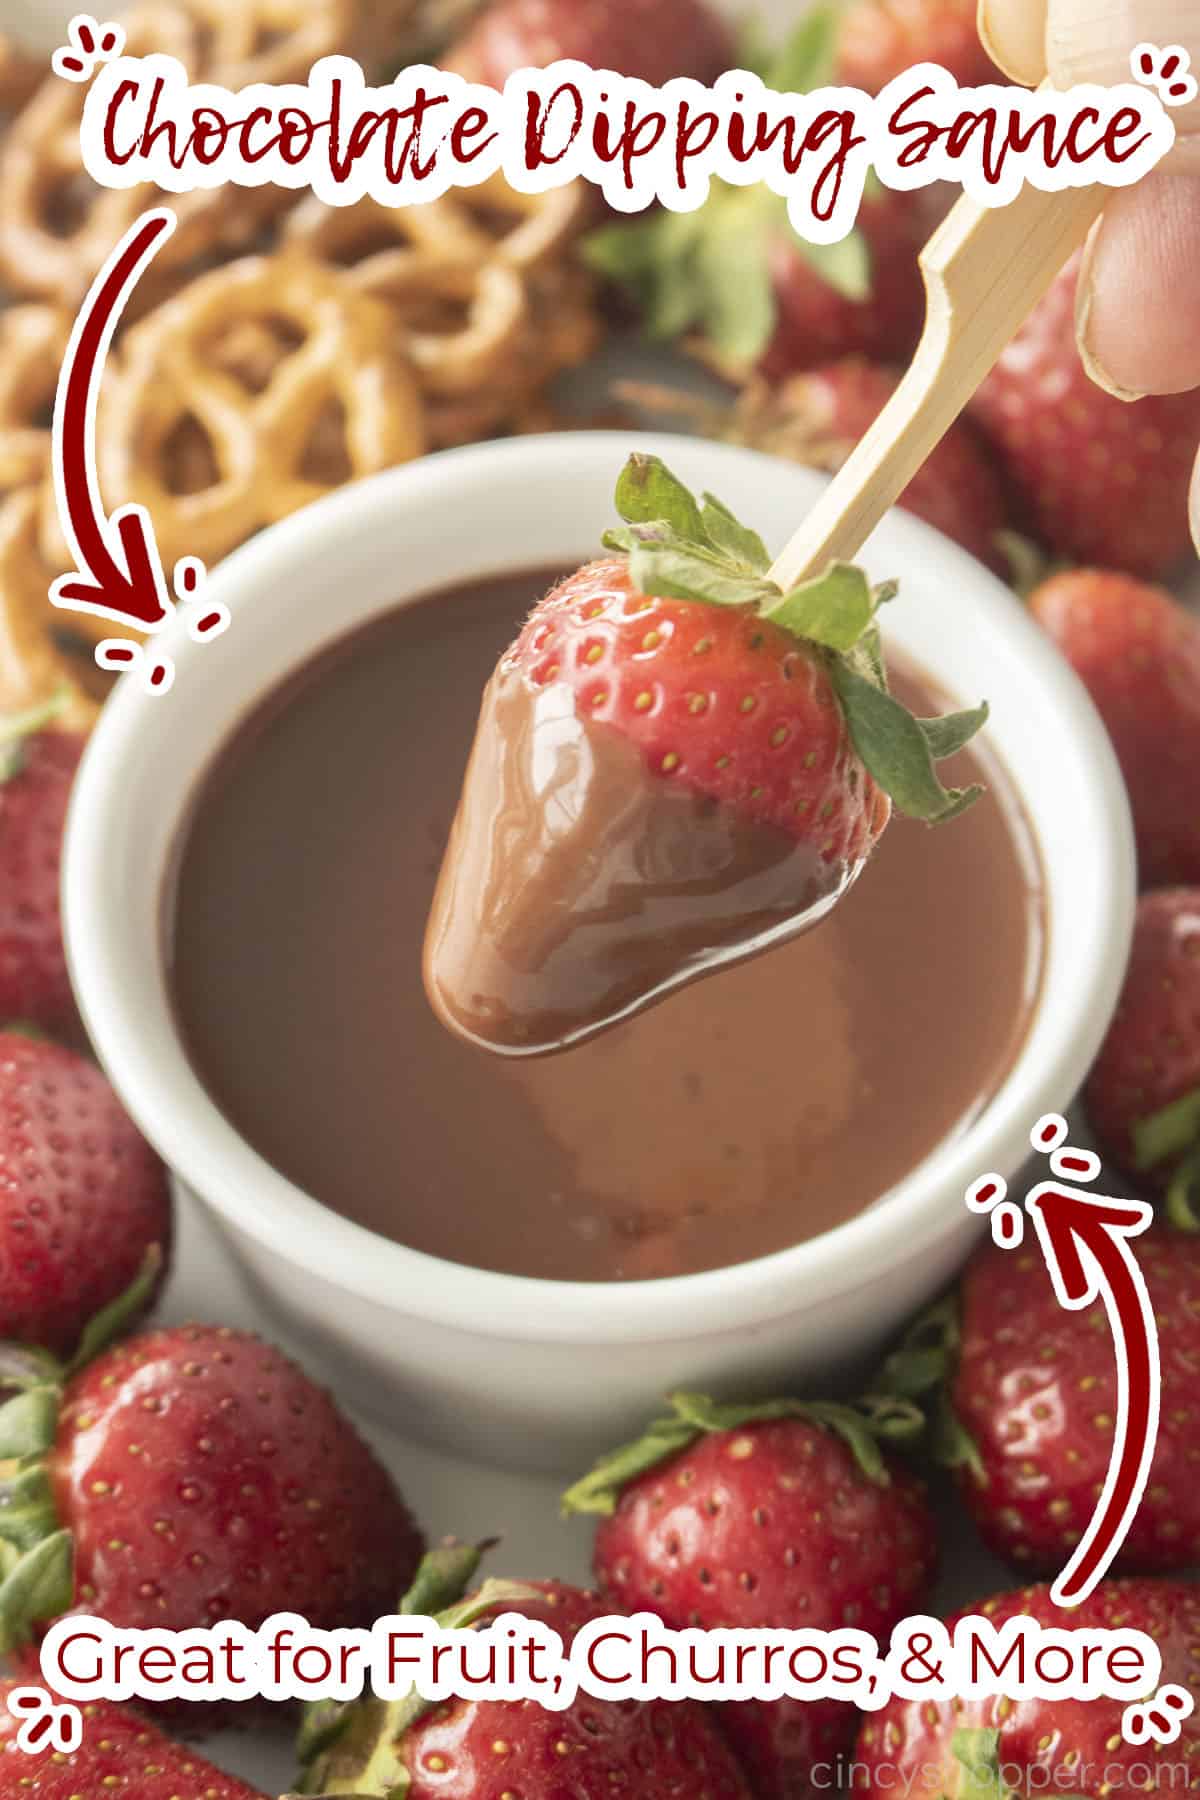 Text on image Chocolate Dipping Sauce. Great for fruit, churros, & More